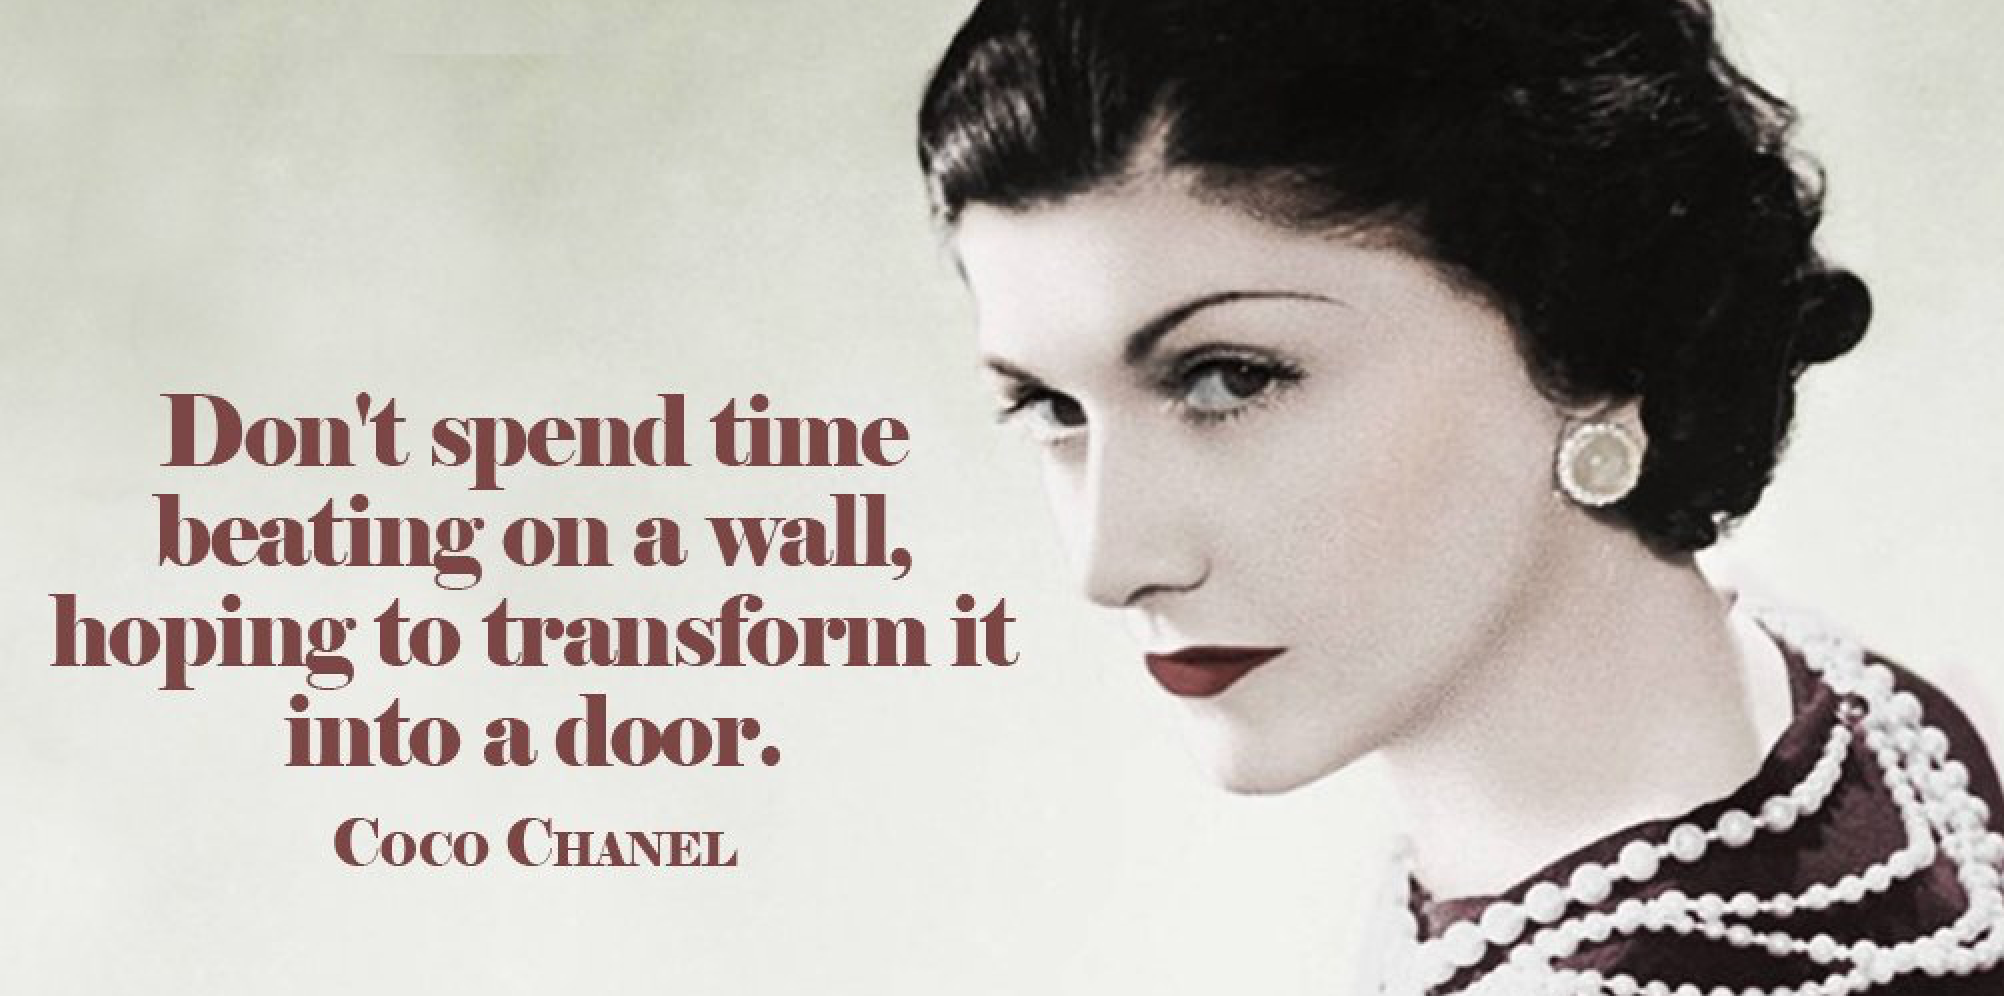 632198 A woman who cuts her hair is about to change her life  Coco  Chanel quote  Rare Gallery HD Wallpapers